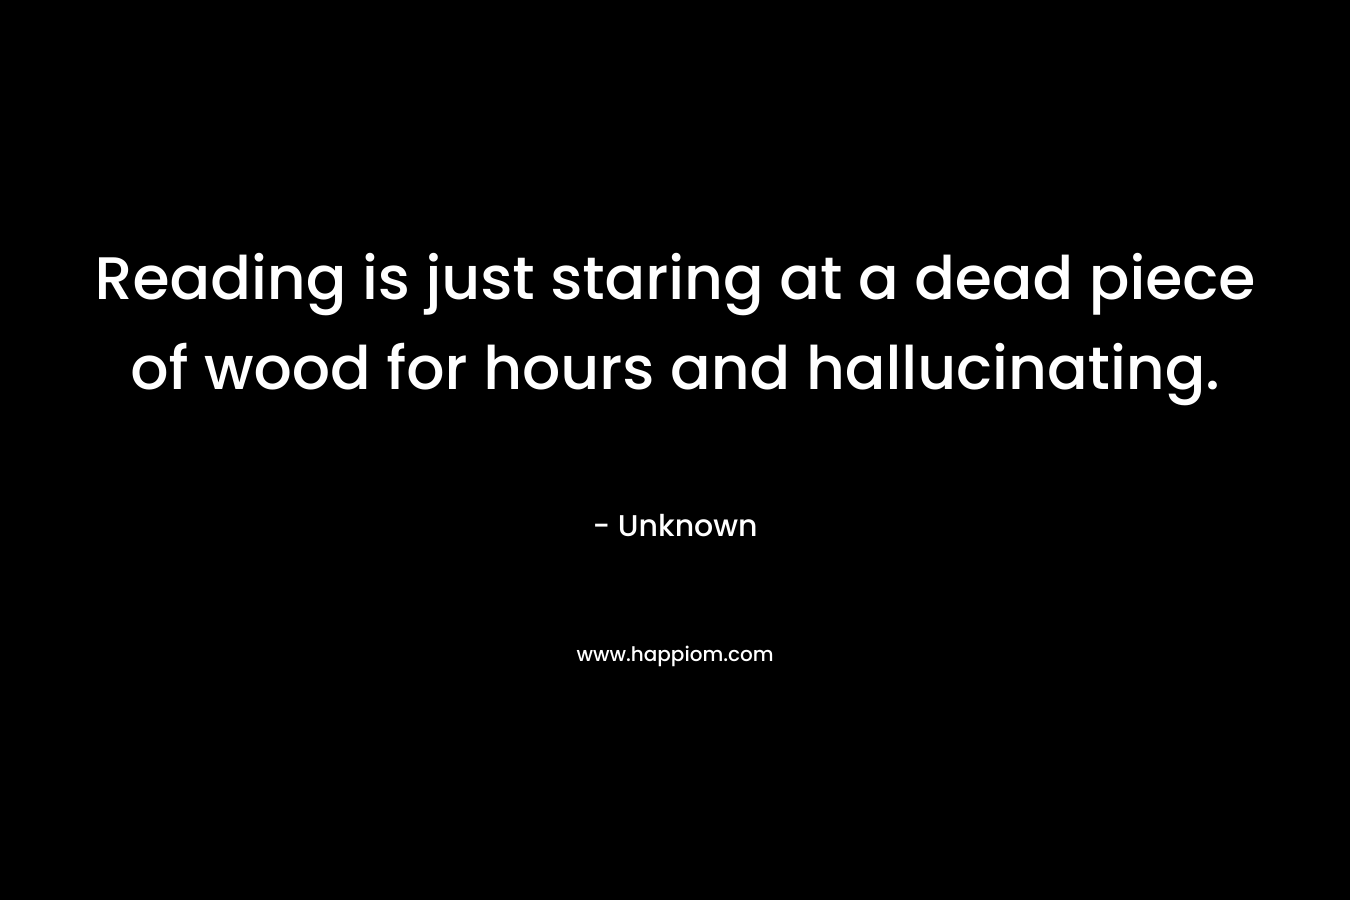 Reading is just staring at a dead piece of wood for hours and hallucinating. – Unknown